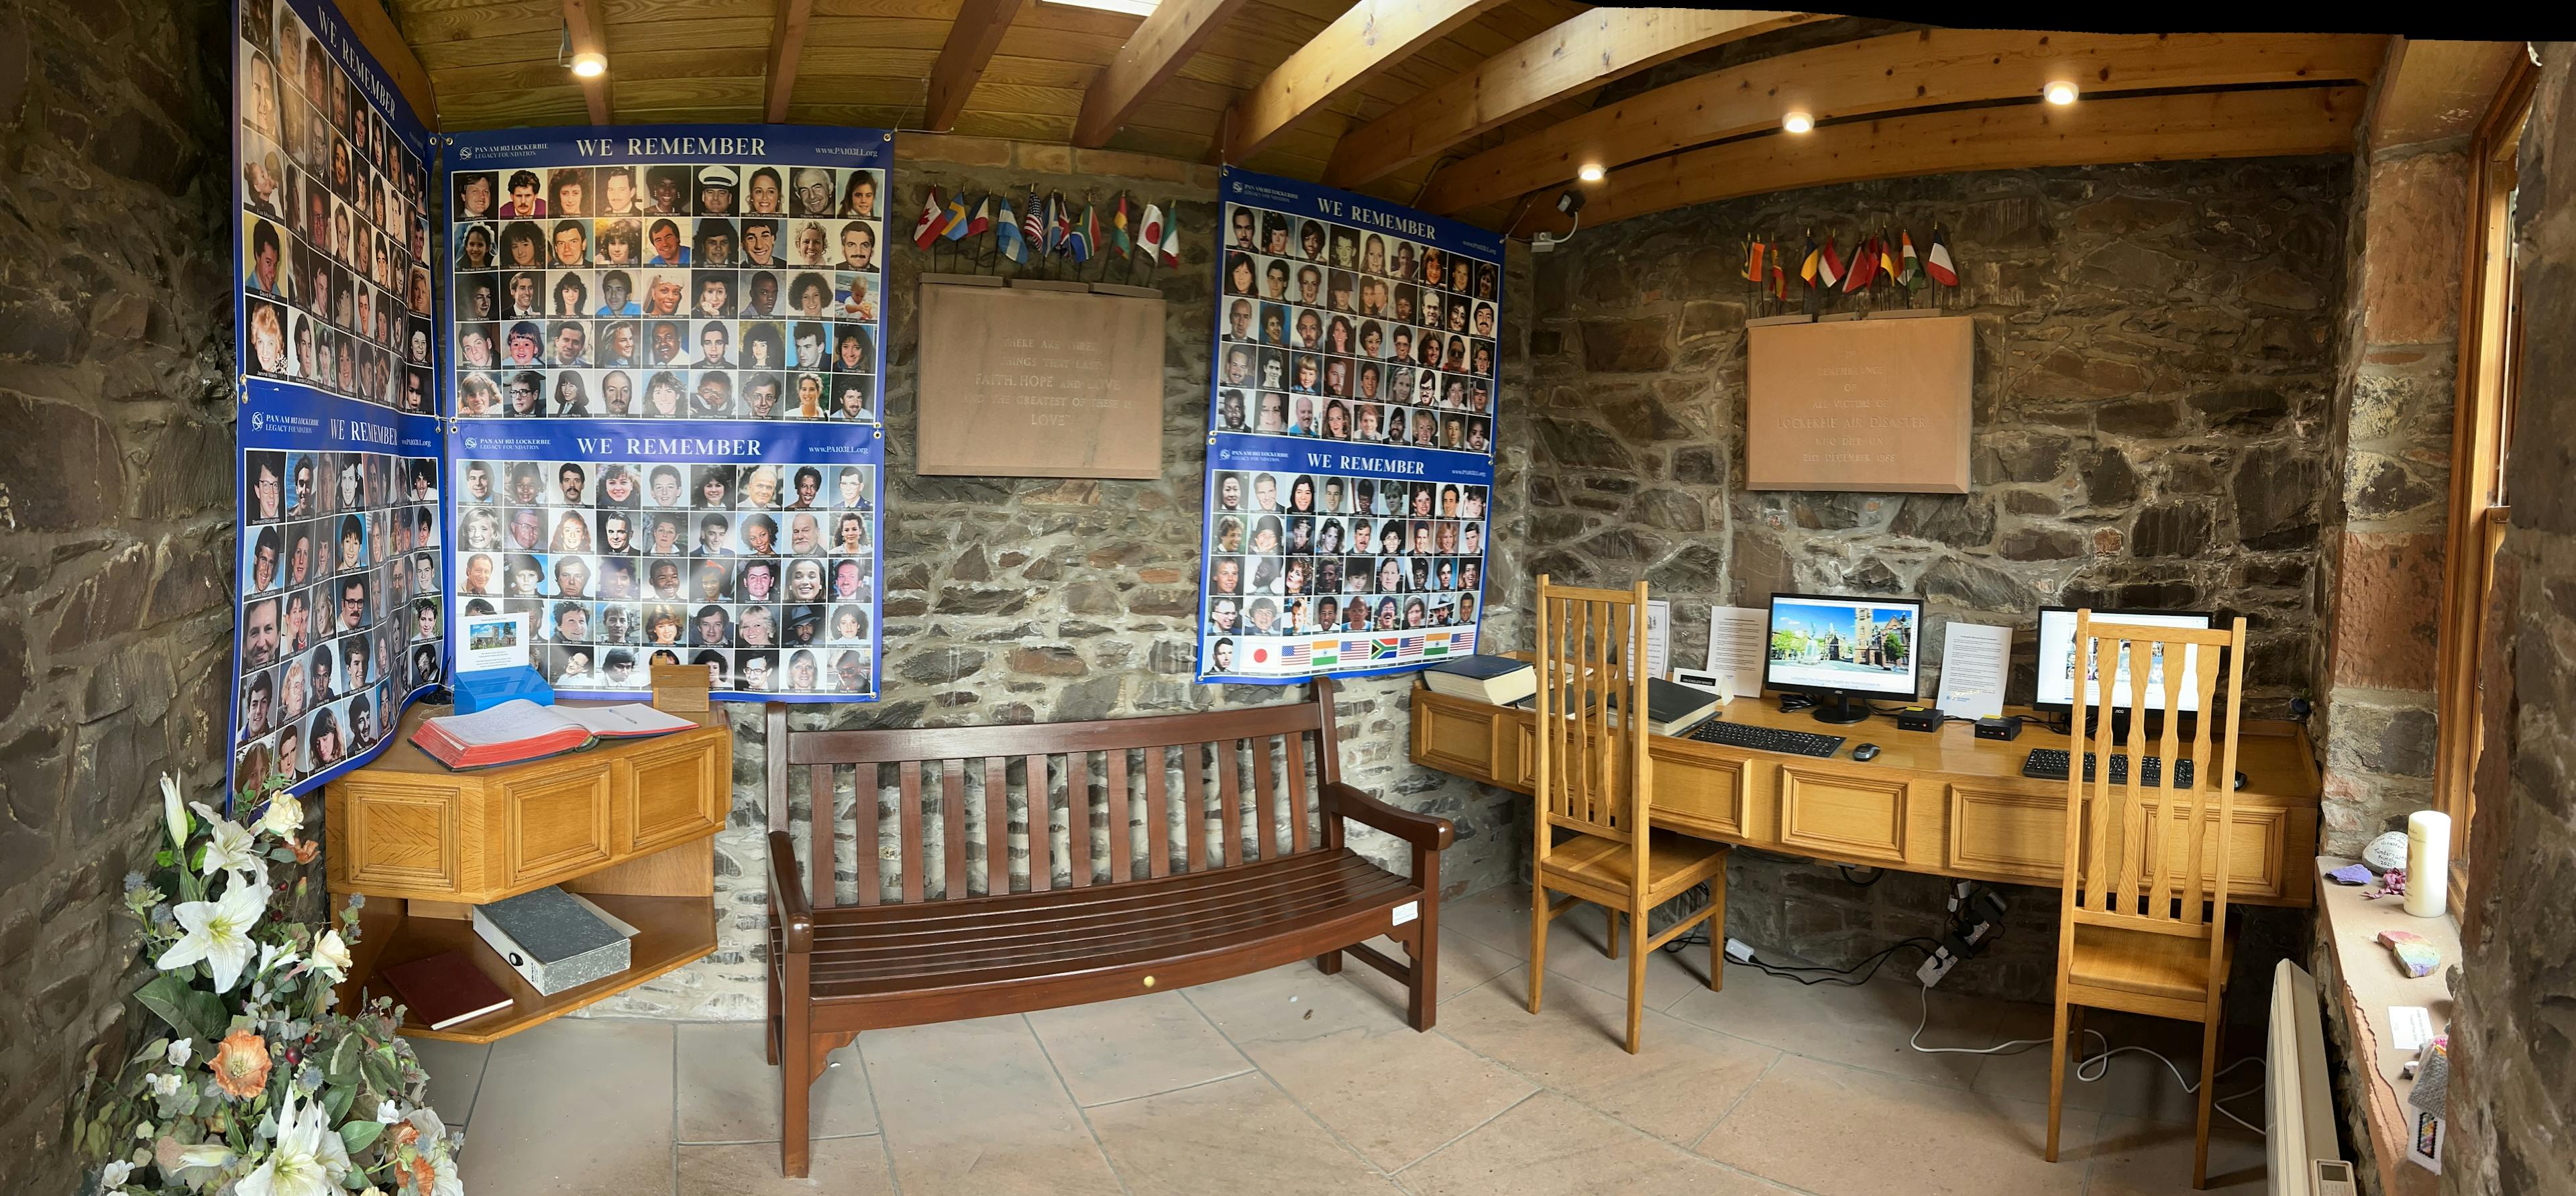 Shocking Theft Of Donation Cash From Lockerbie Disaster Memorial Room